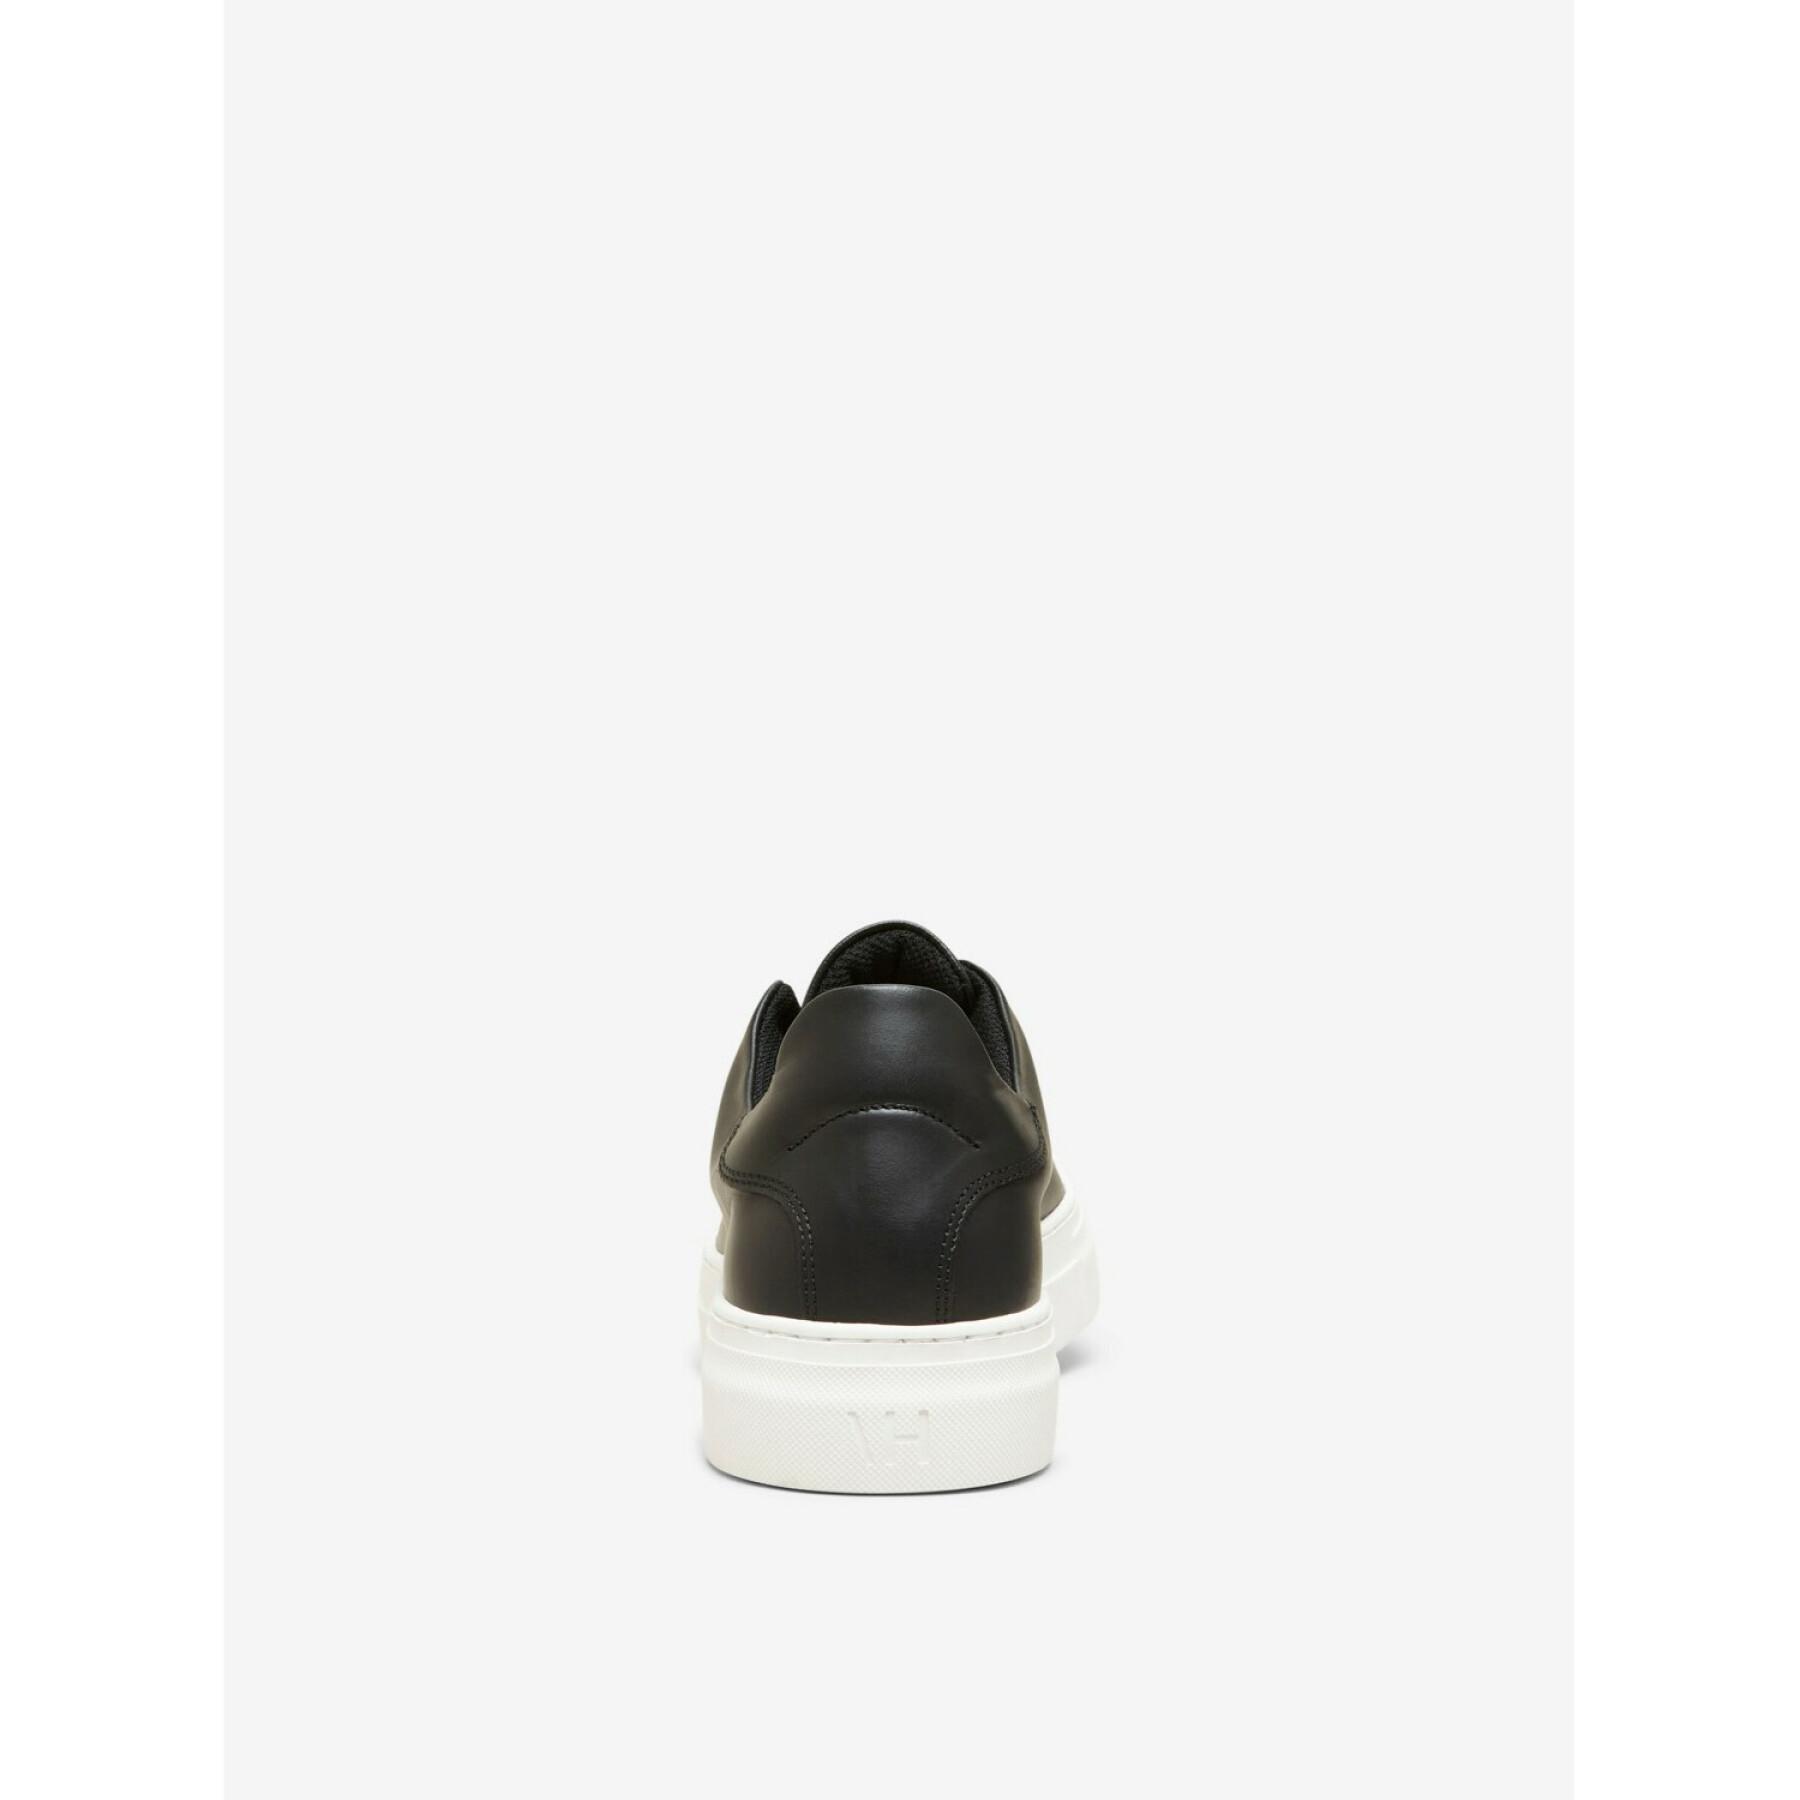 Skor Selected David chunky leather trainer